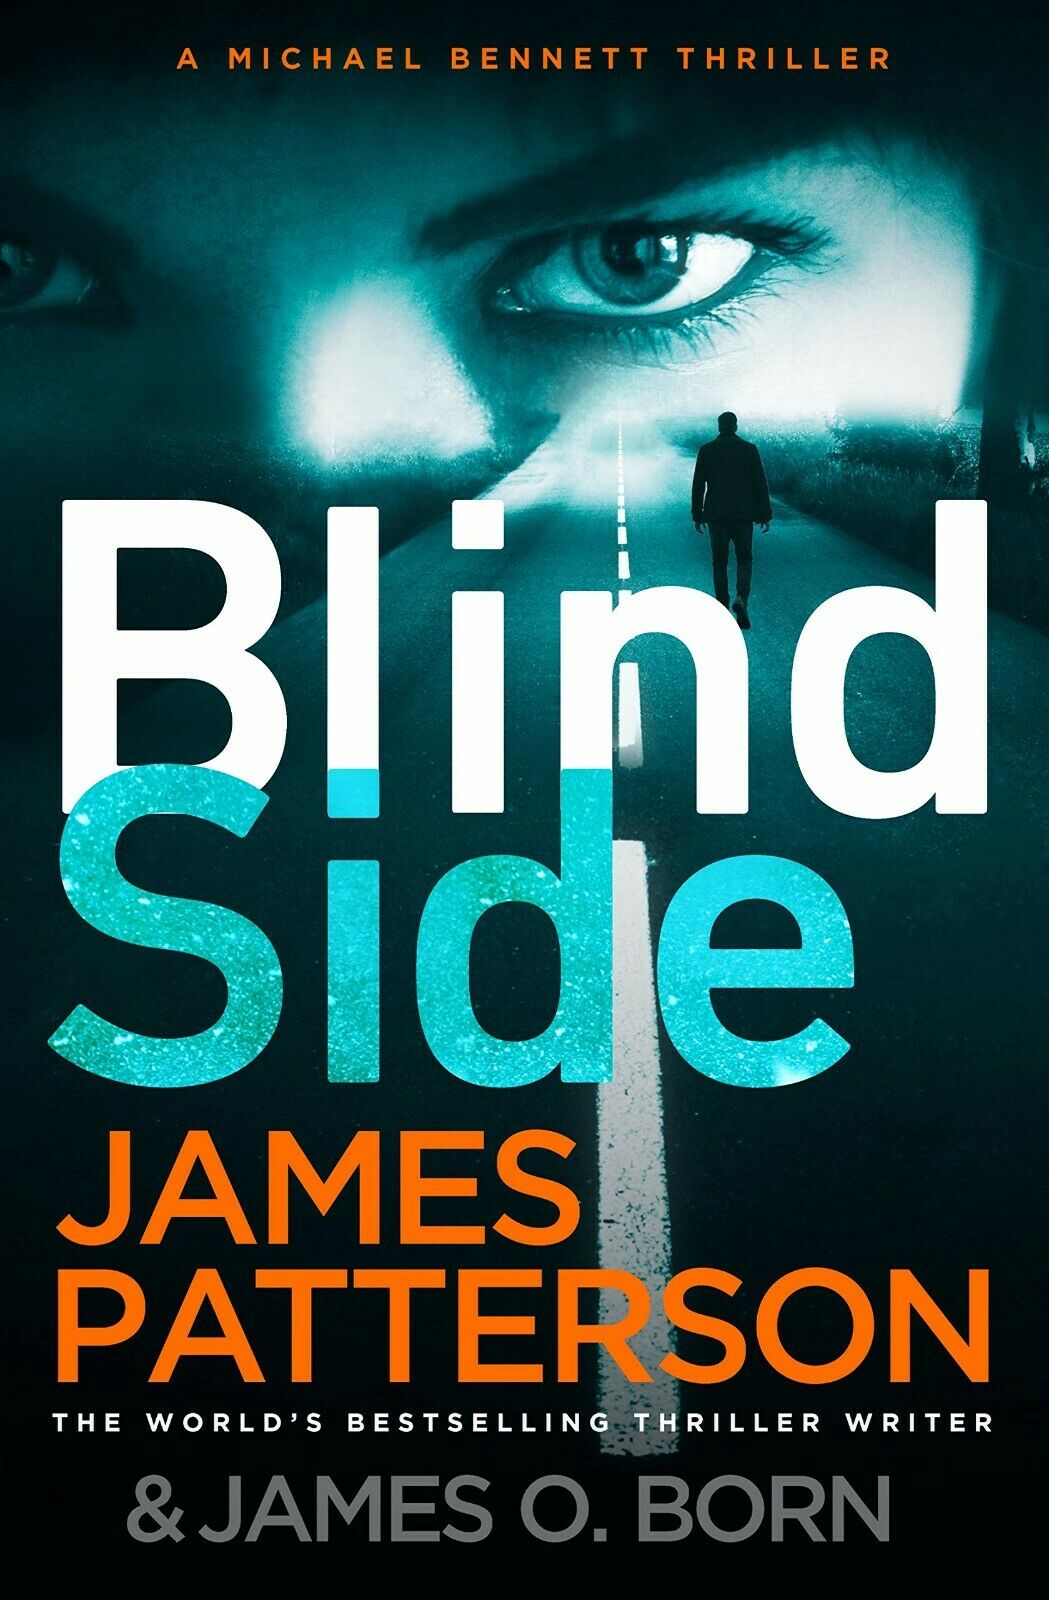 james patterson books 2020 in order